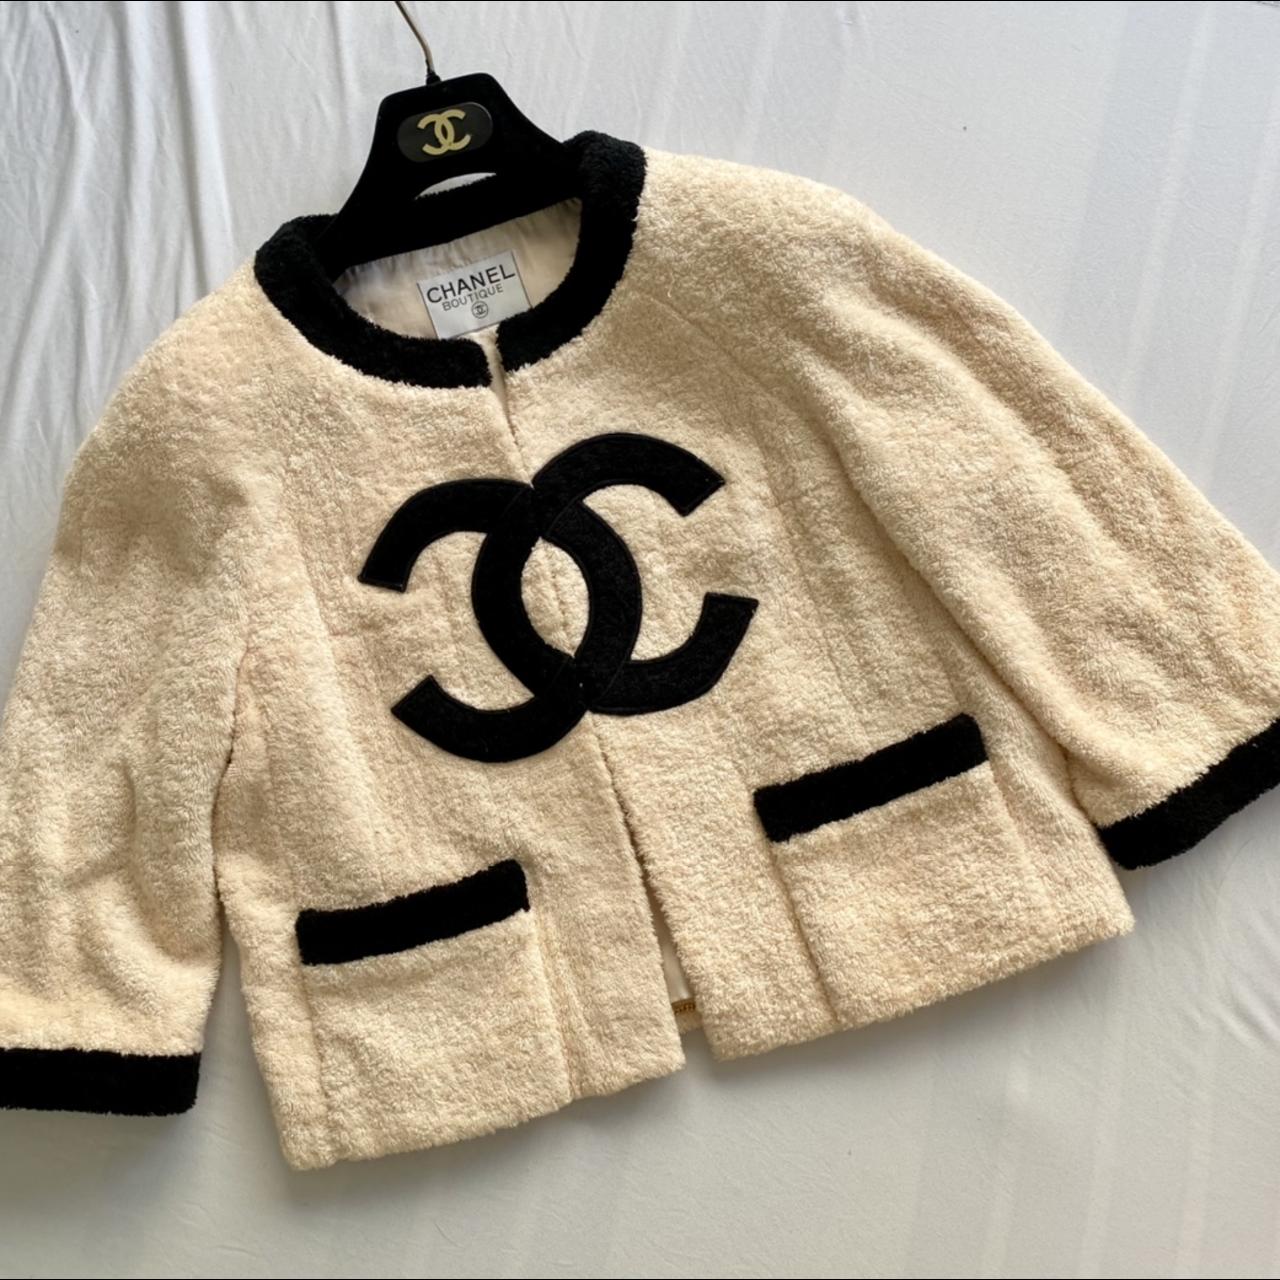 Magnificent Vintage Chanel Terrycloth Jacket in size